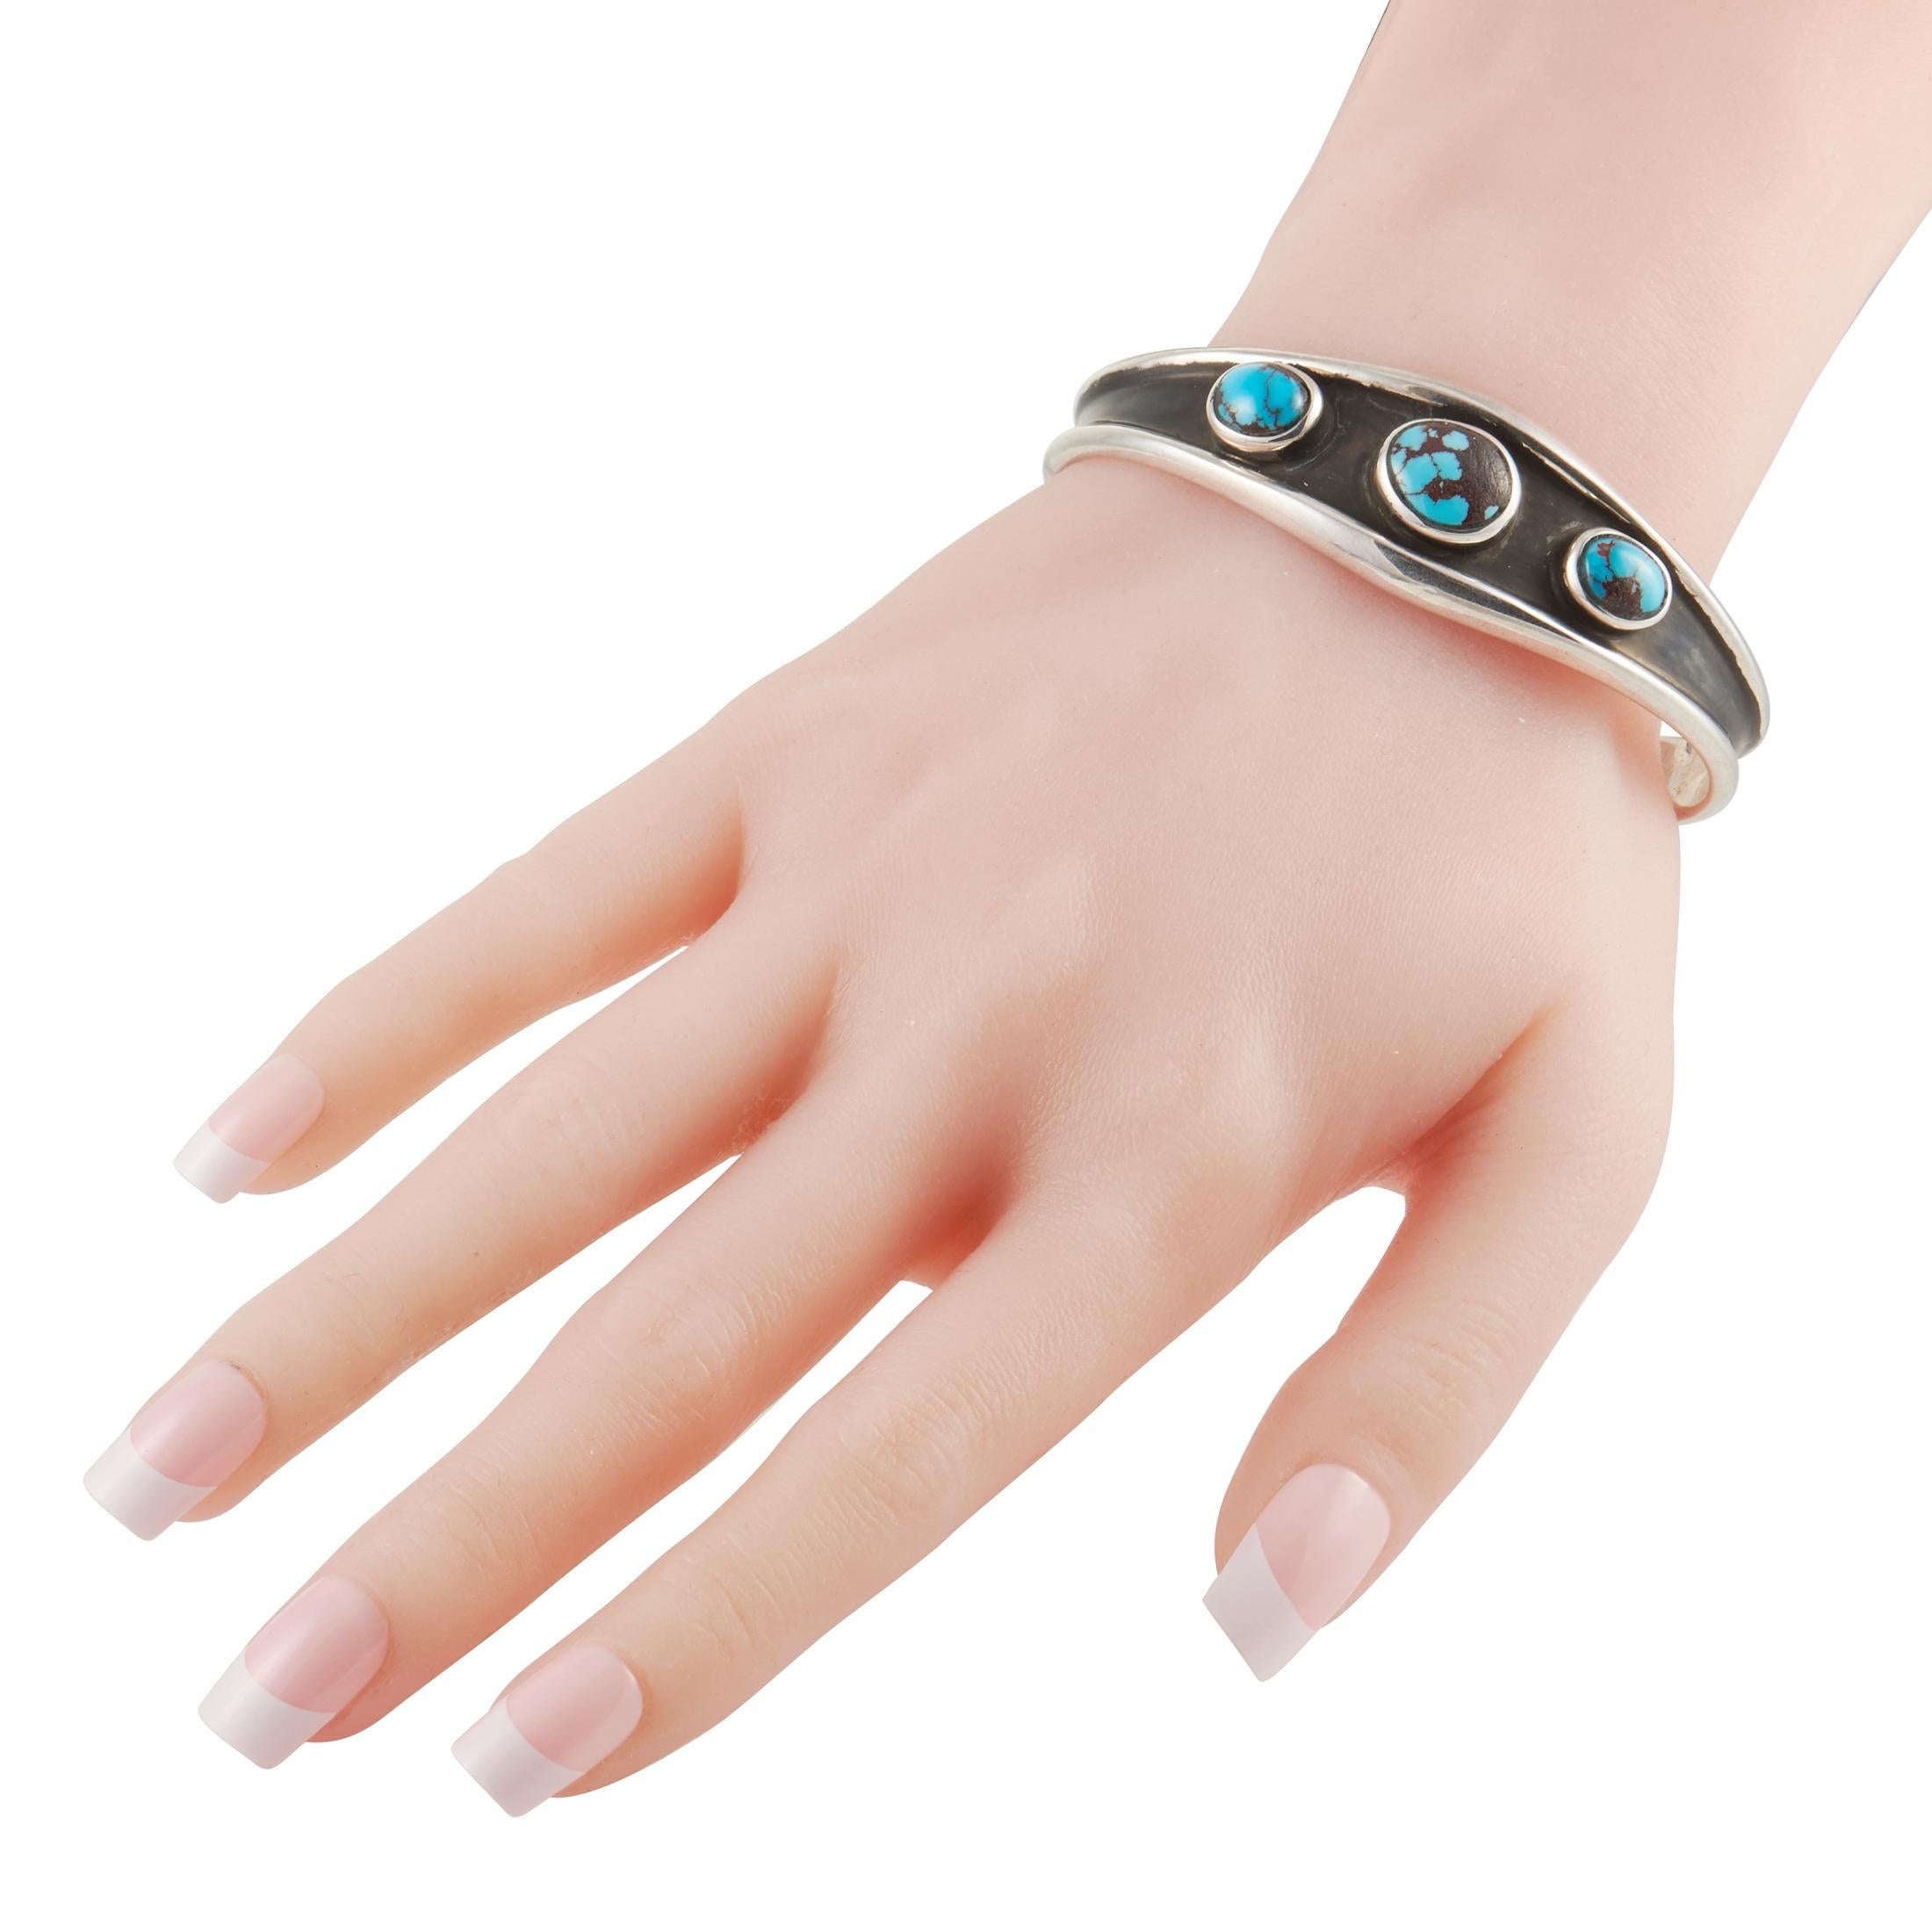 Captivating colors and a vintage-inspired sense of style make this cuff bracelet from King Baby a must-have for anyone with a rugged, natural aesthetic. At the center of this bangle’s darkened Sterling Silver setting are a trio of turquoise stones.